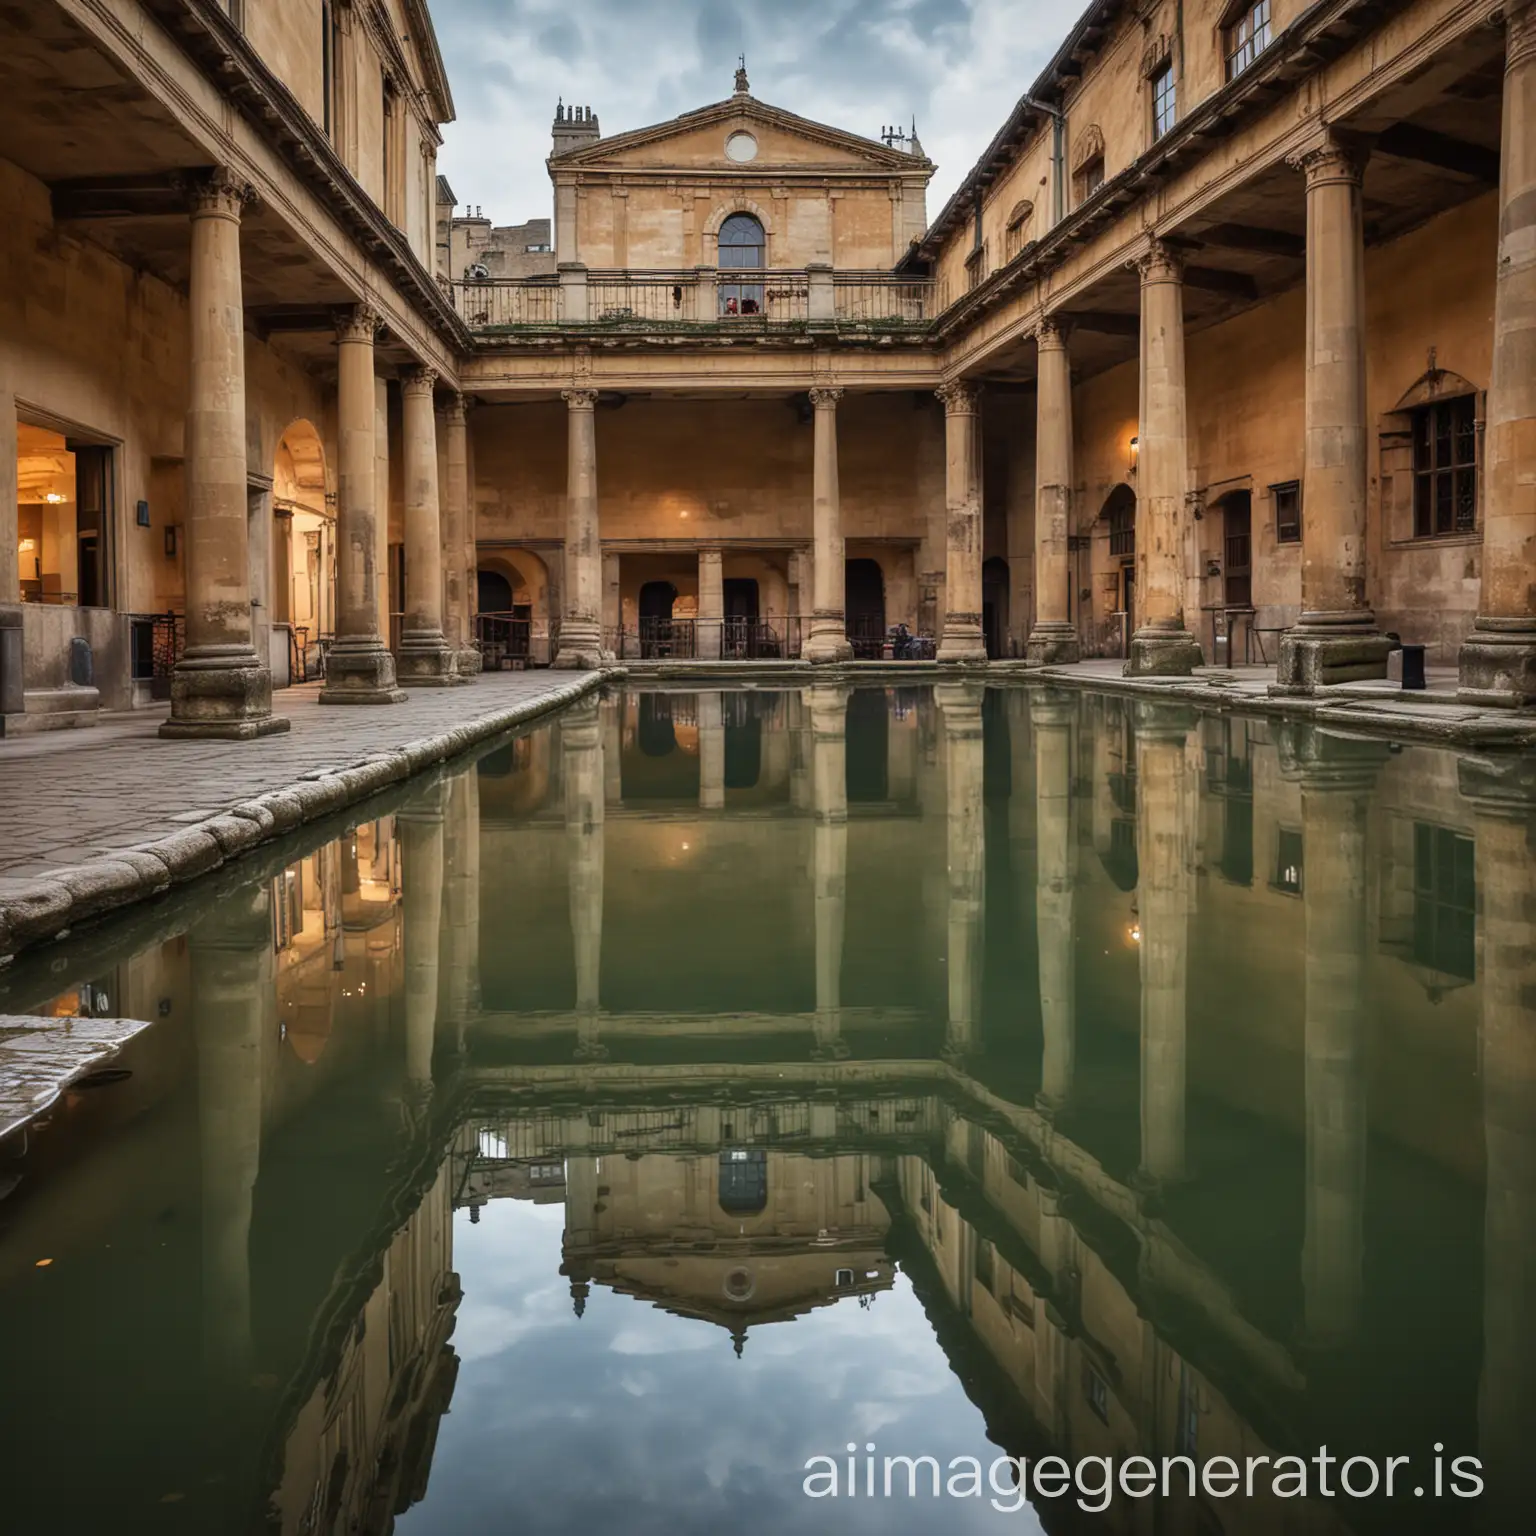 A serene image of the Roman Baths with the iconic Georgian architecture reflected in the water, showcasing the city's ancient Roman heritage and elegant architectural style.

